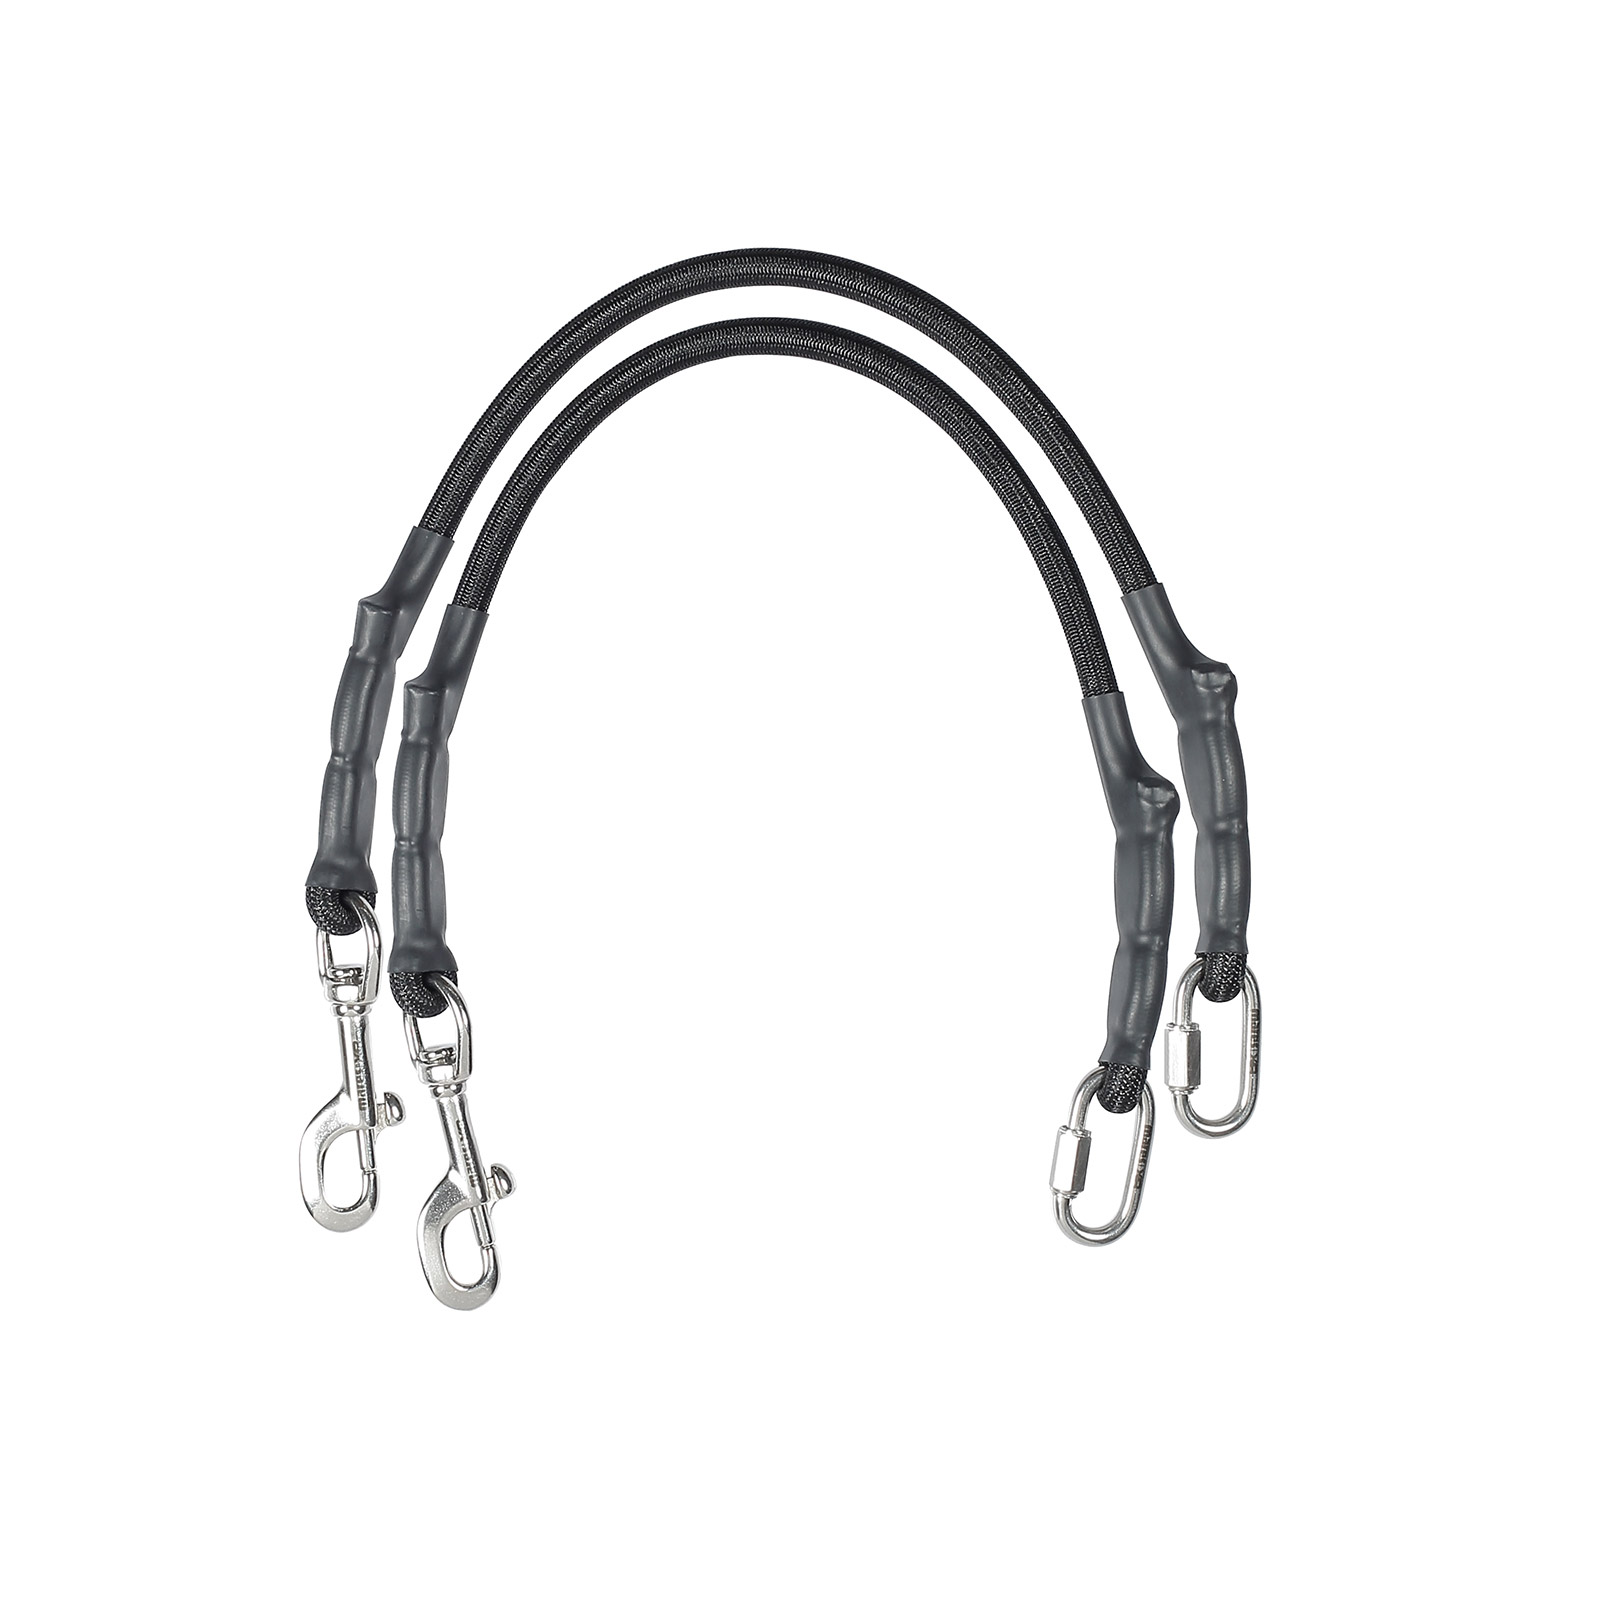 Mares XR Sidemount Stage Bungees